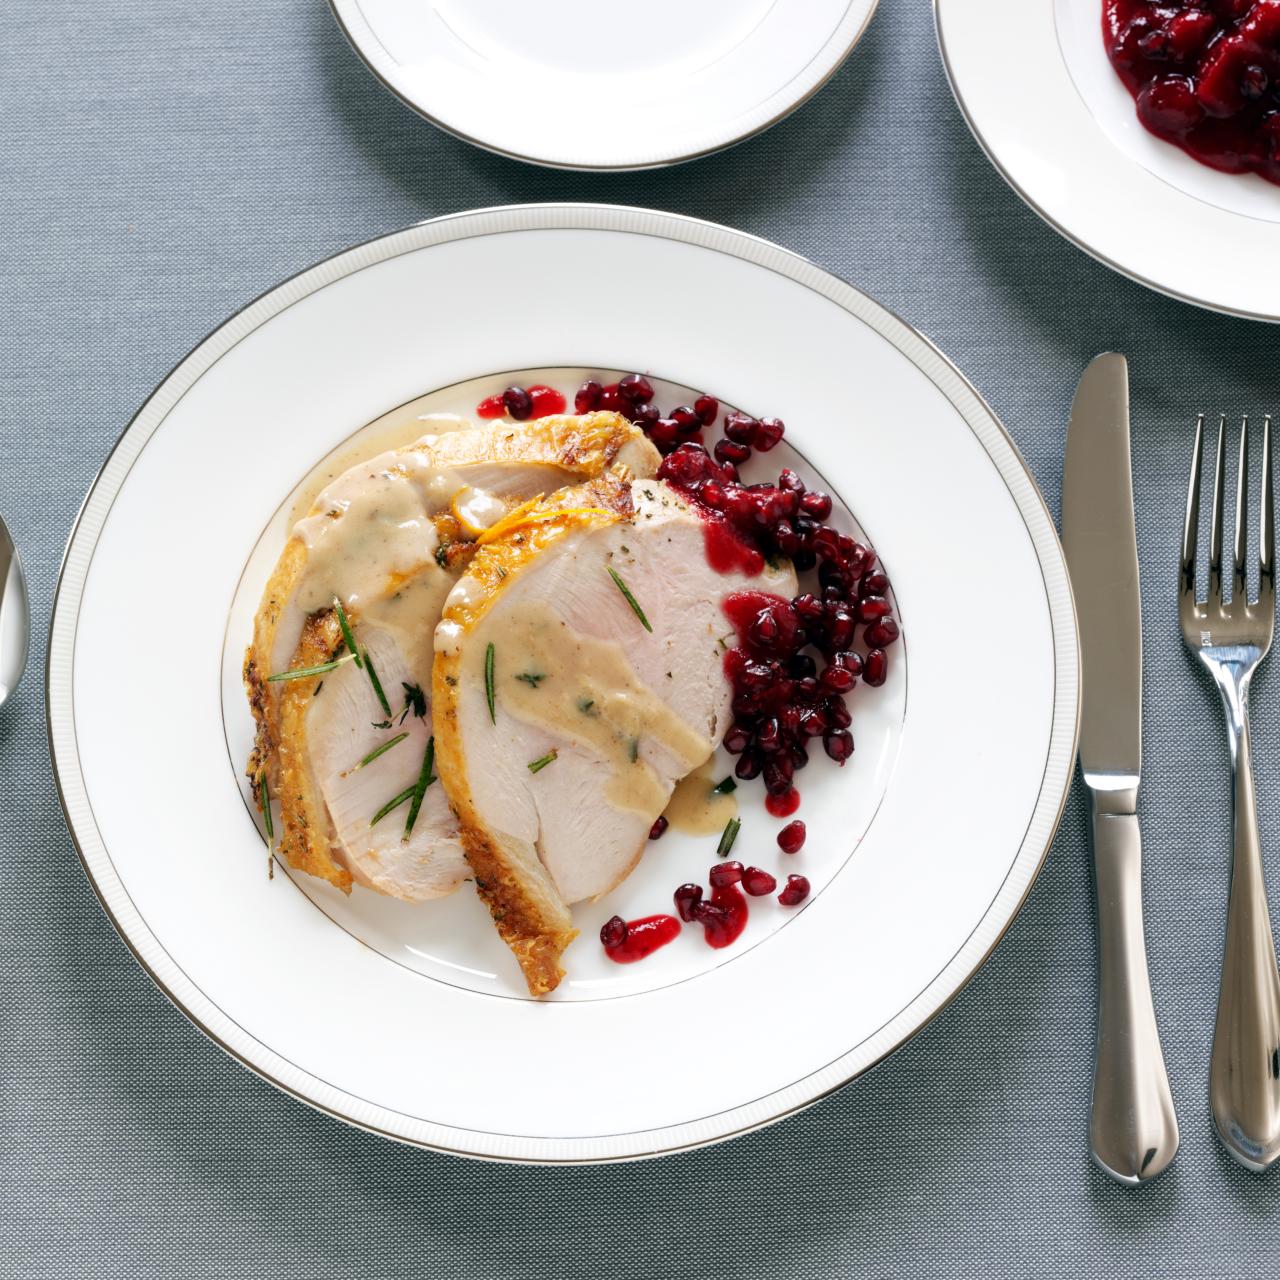 https://food.fnr.sndimg.com/content/dam/images/food/fullset/2012/8/14/1/CCWID403_roasted-turkey-breast-with-creamy-gravy-and-cranberry-pomegranate-sauce-recipe_s4x3.jpg.rend.hgtvcom.1280.1280.suffix/1371609722908.jpeg